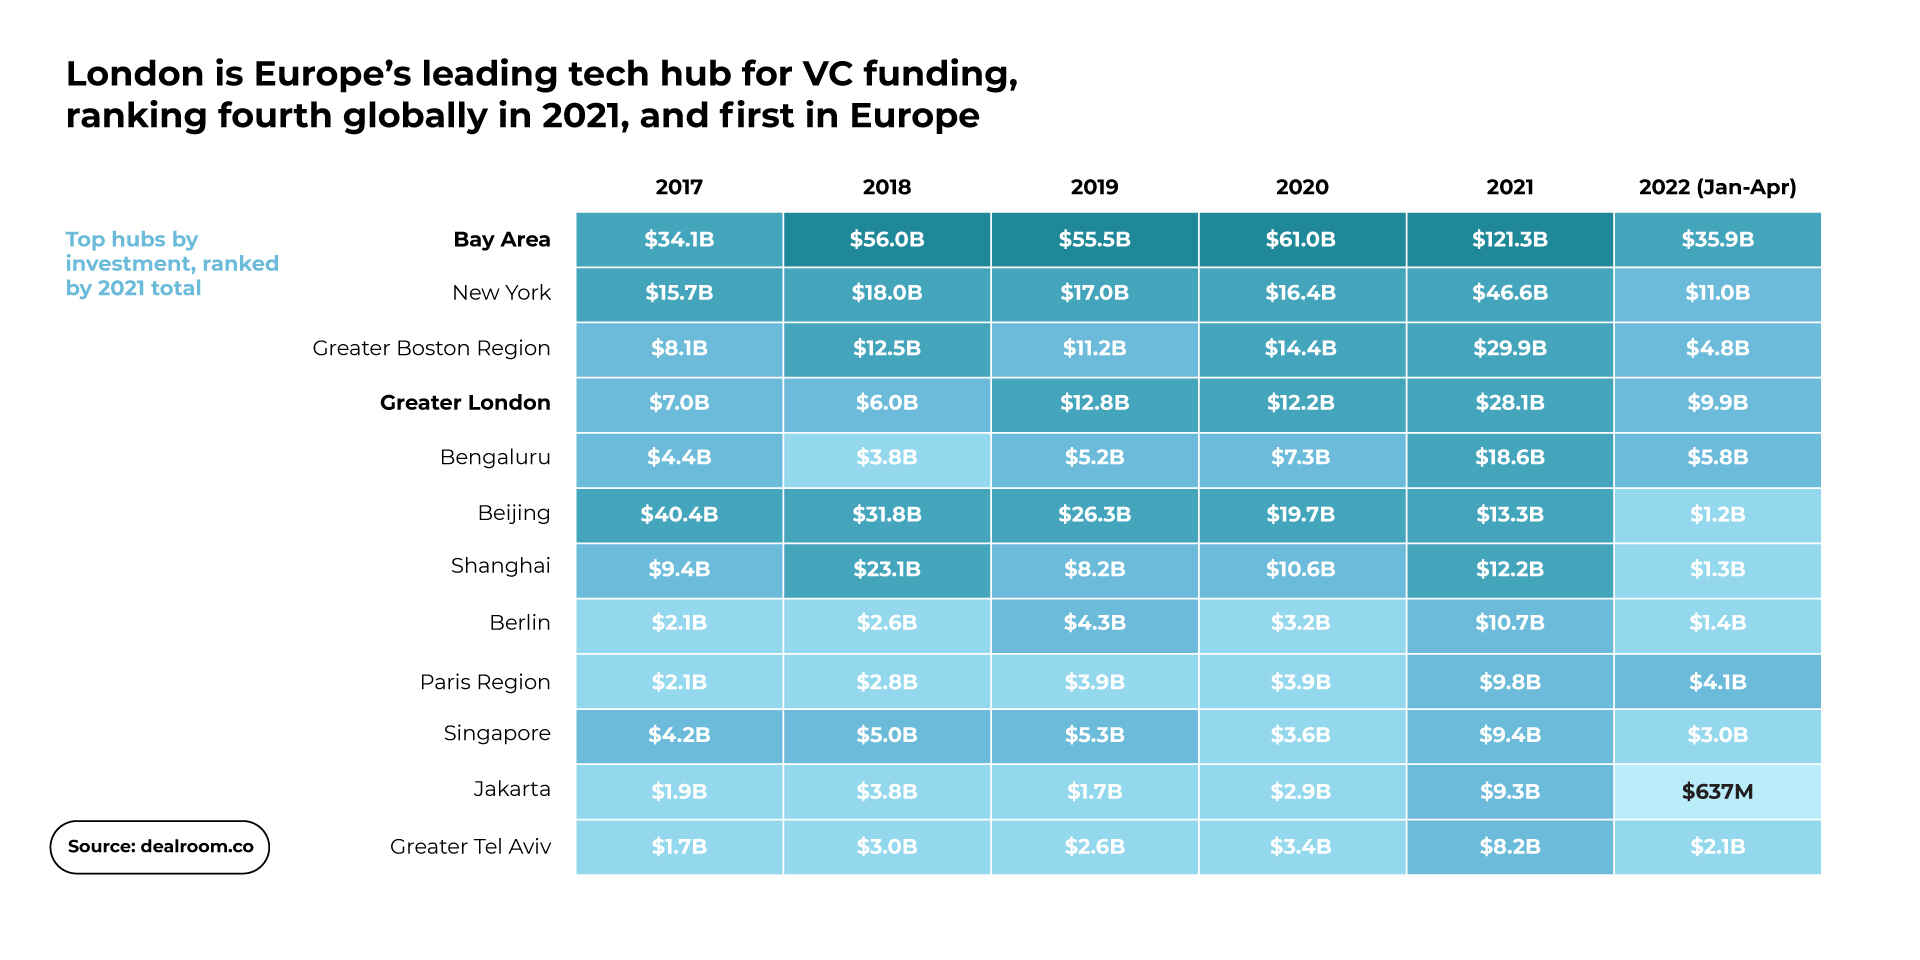 London is Europe's leading hub for VC funding and fourth leading hub worldwide, according to Dealroom